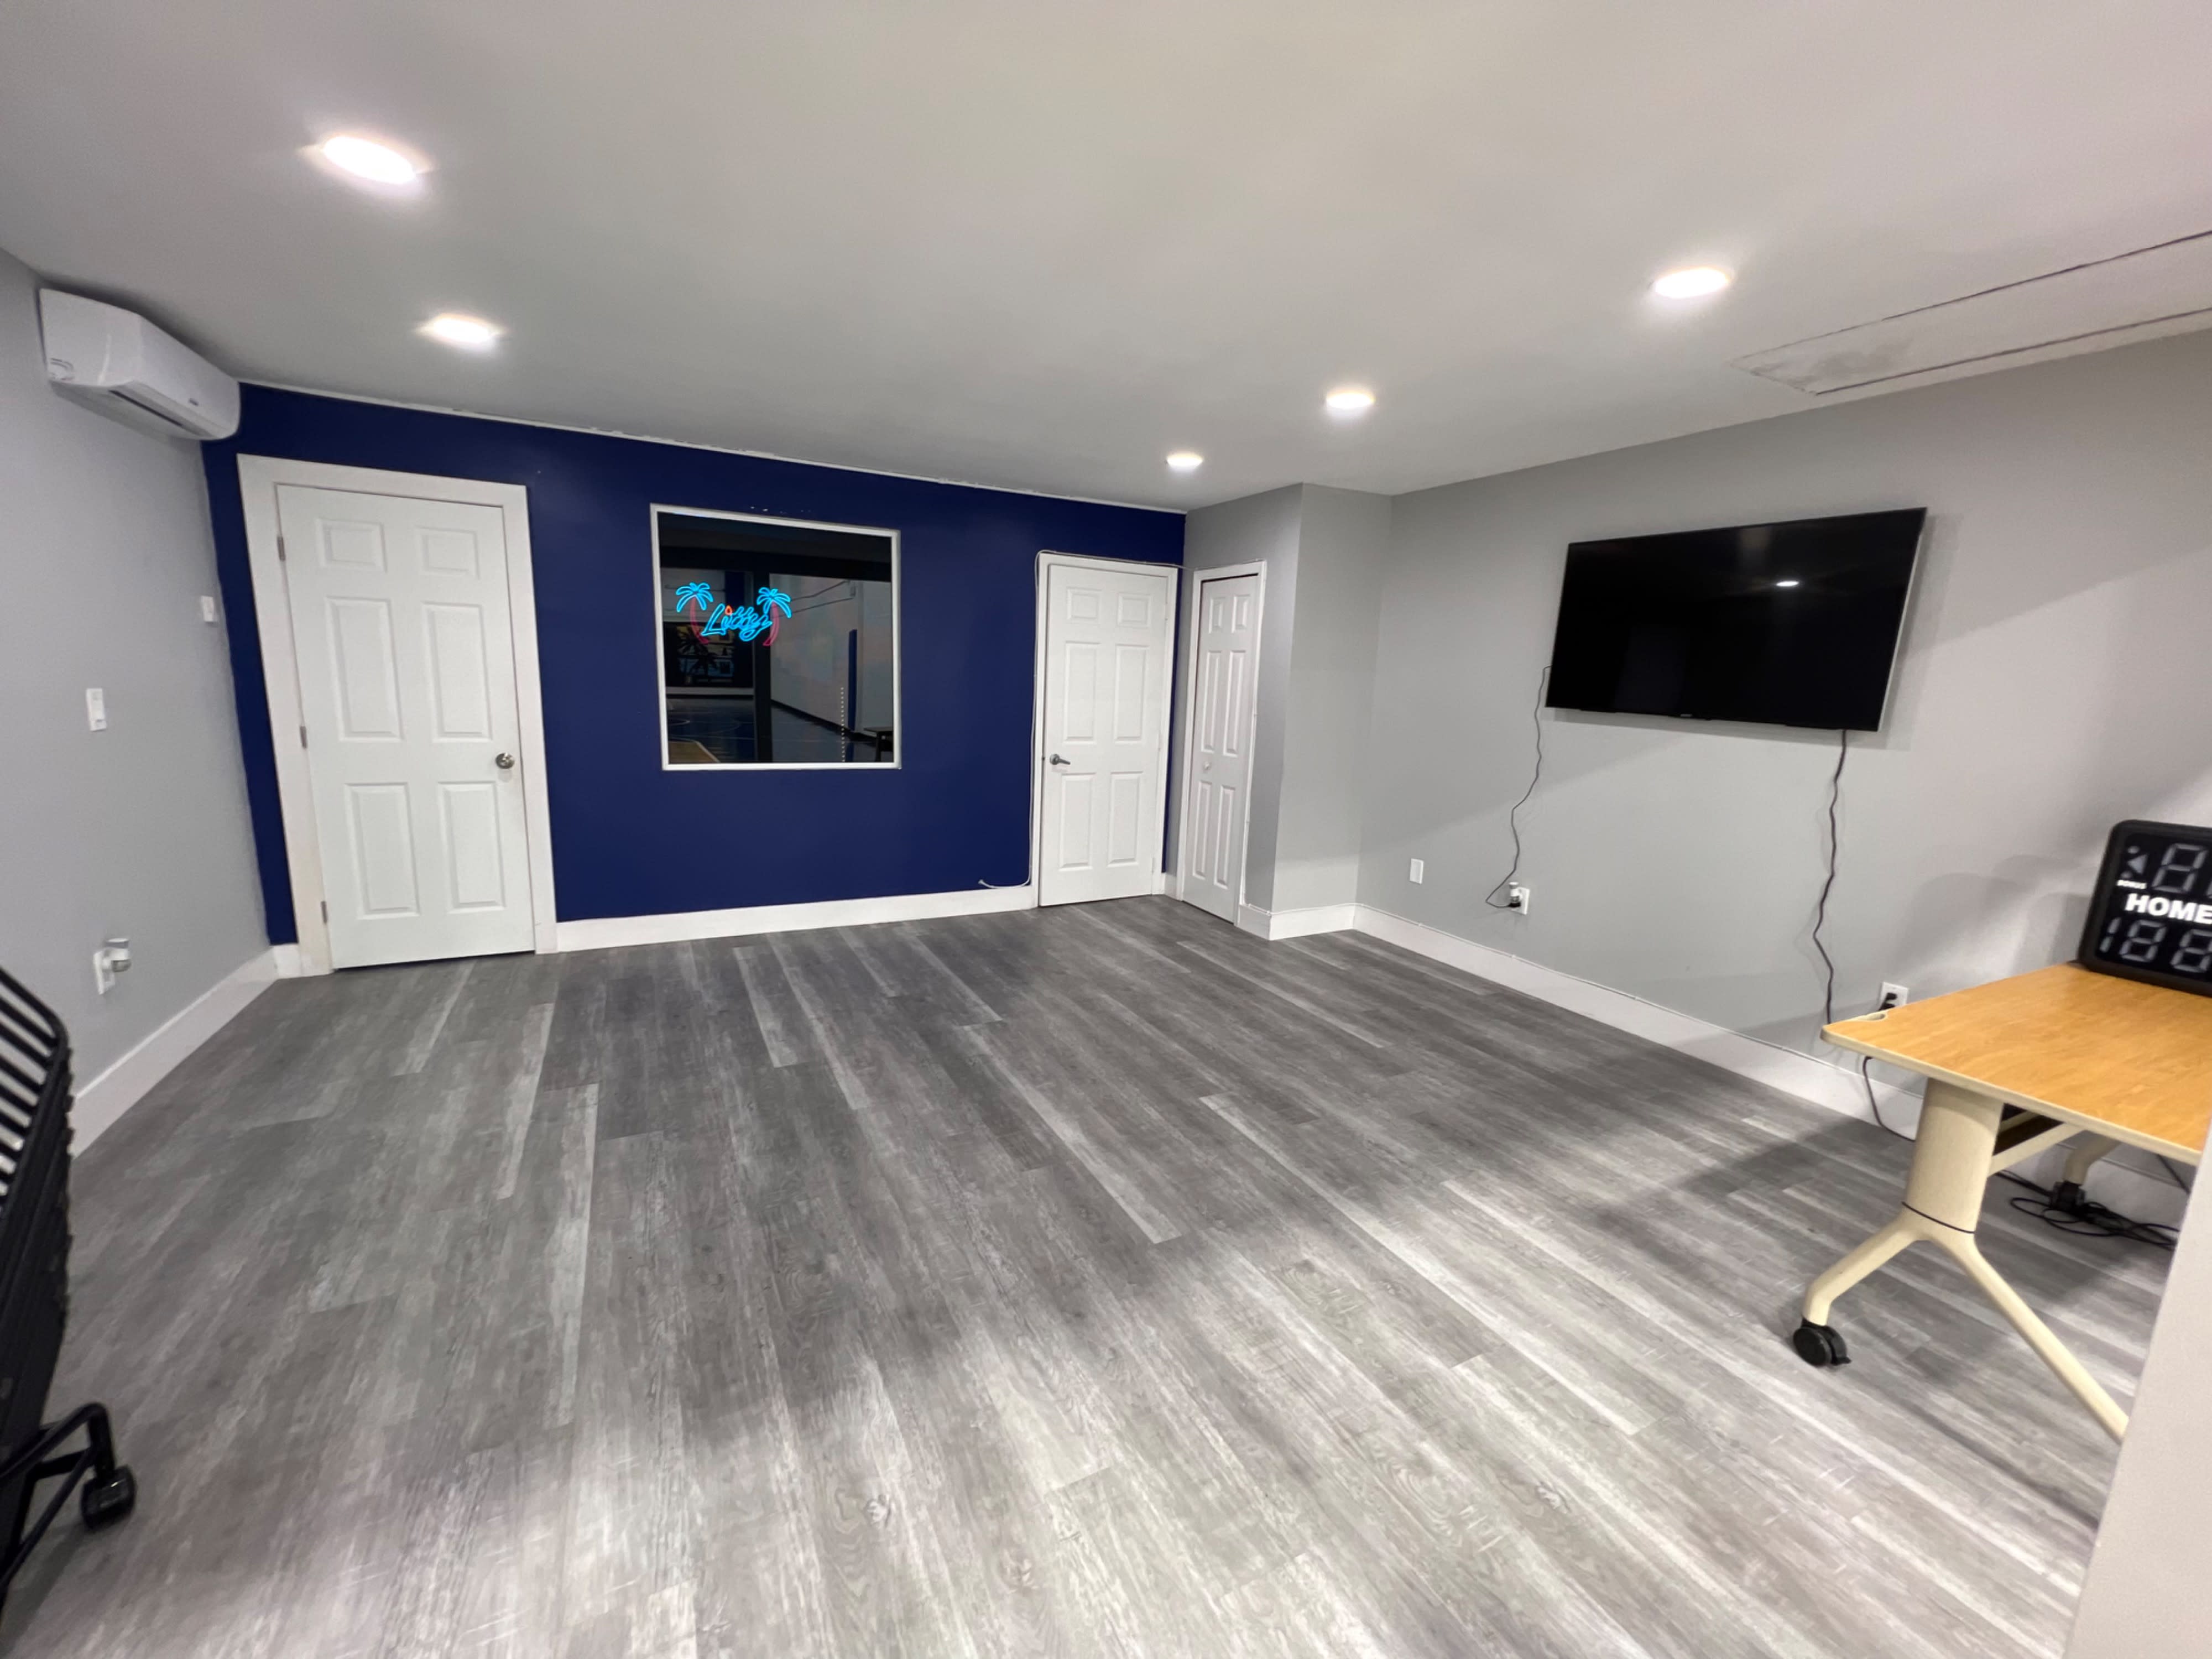 Indoor Gymnasium with lounge and VIP area for events, Miami, FL, Event